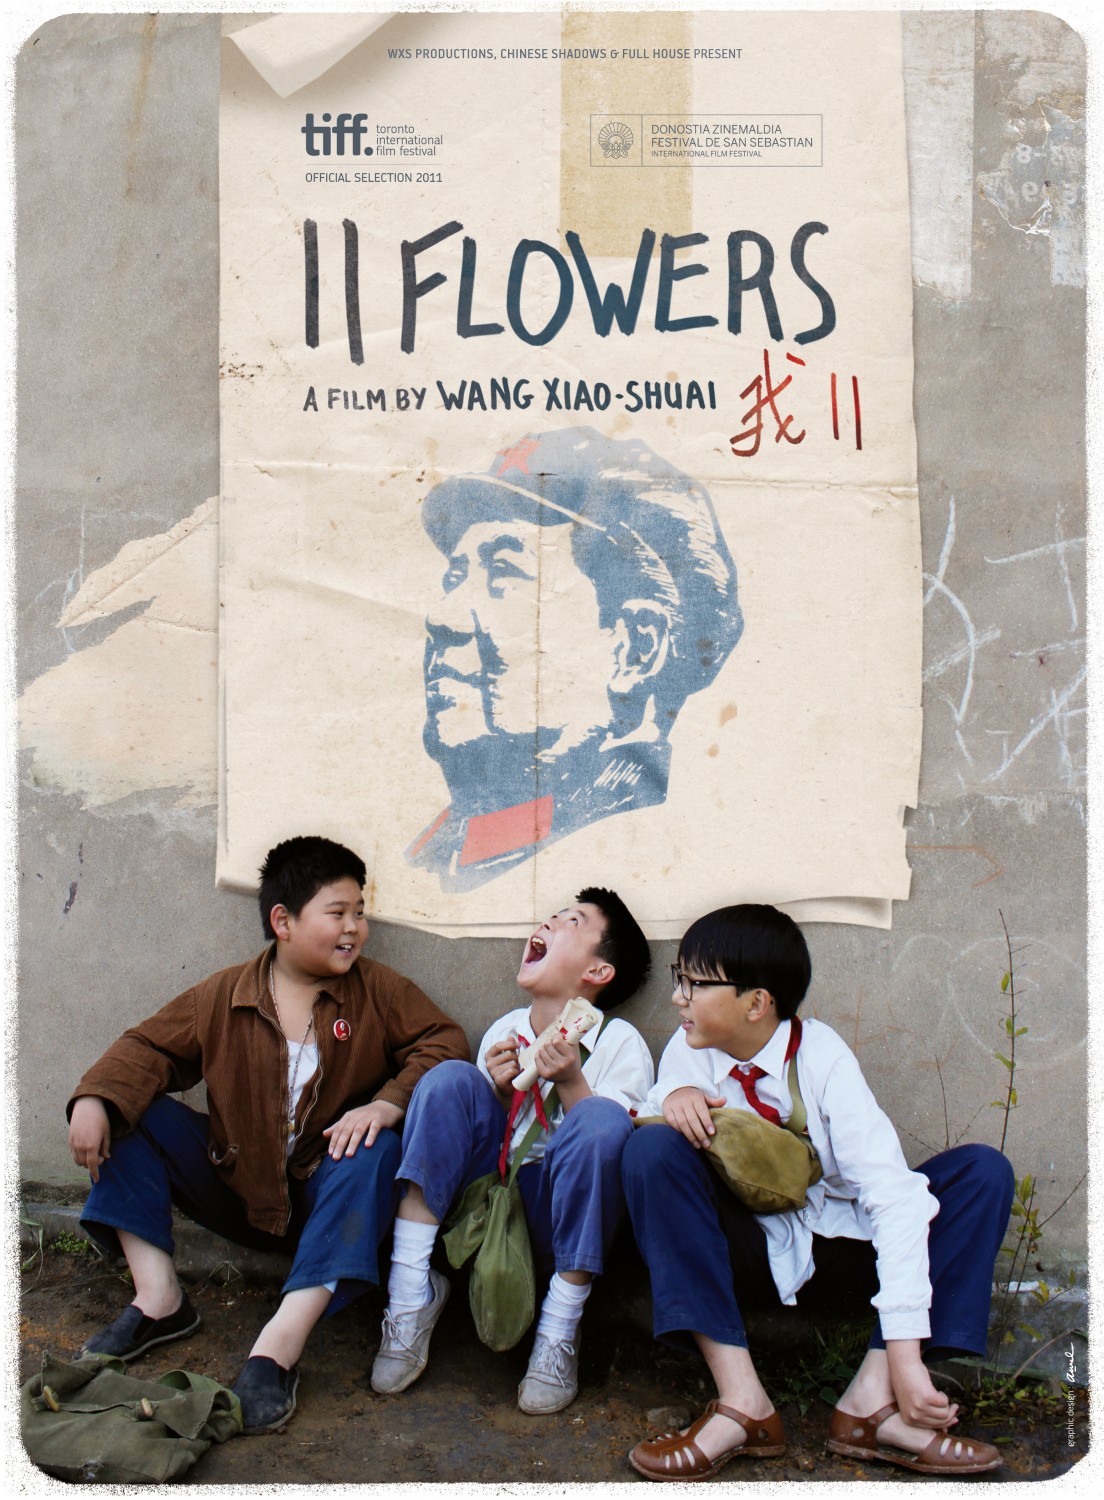 Extra Large Movie Poster Image for 11 Flowers 